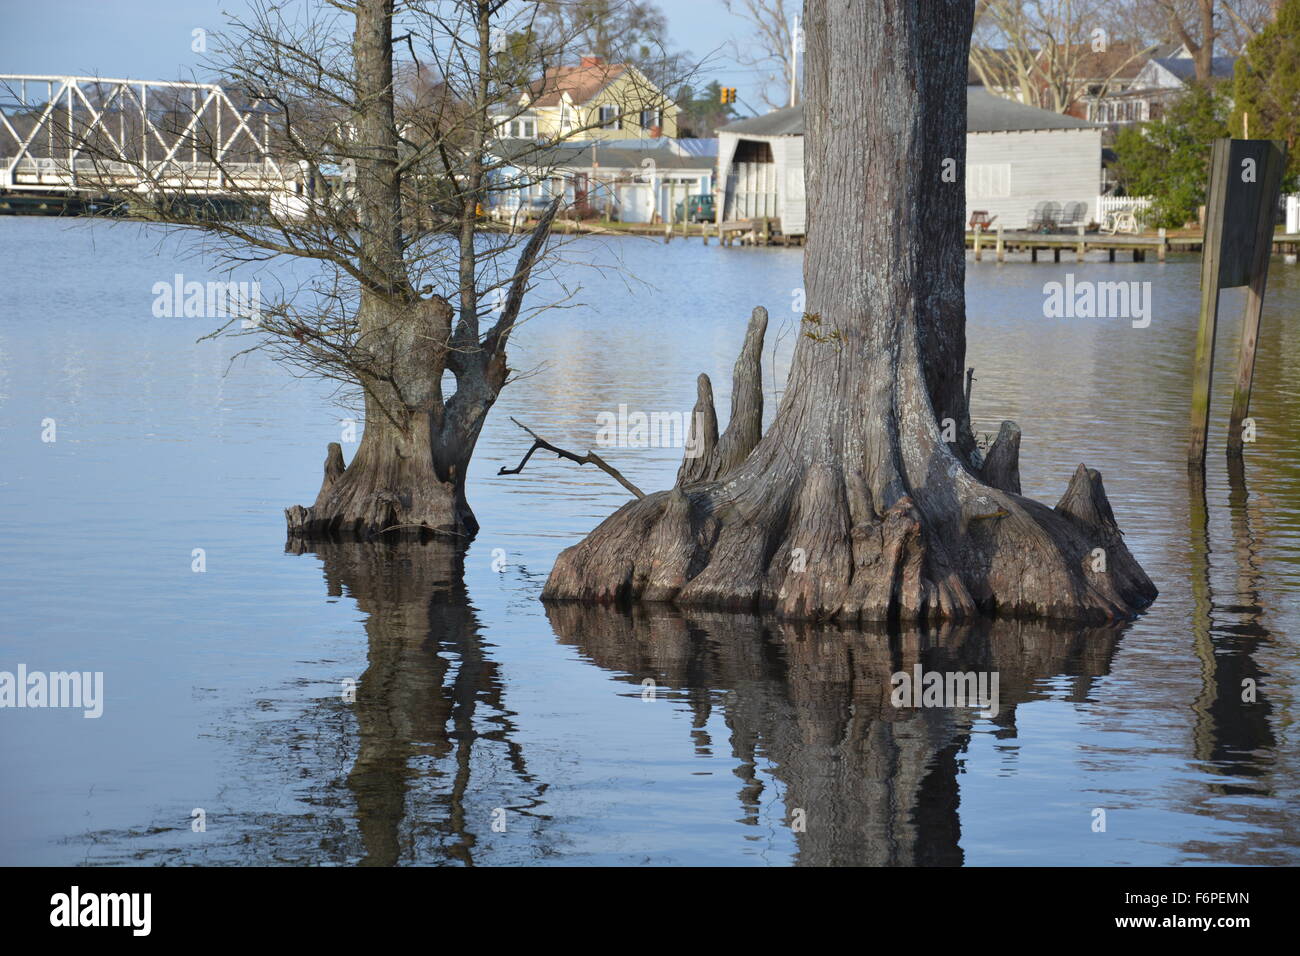 Cypress trees in the Perquimans River with the S Bridge and homes in the background in Hertford North Carolina Stock Photo